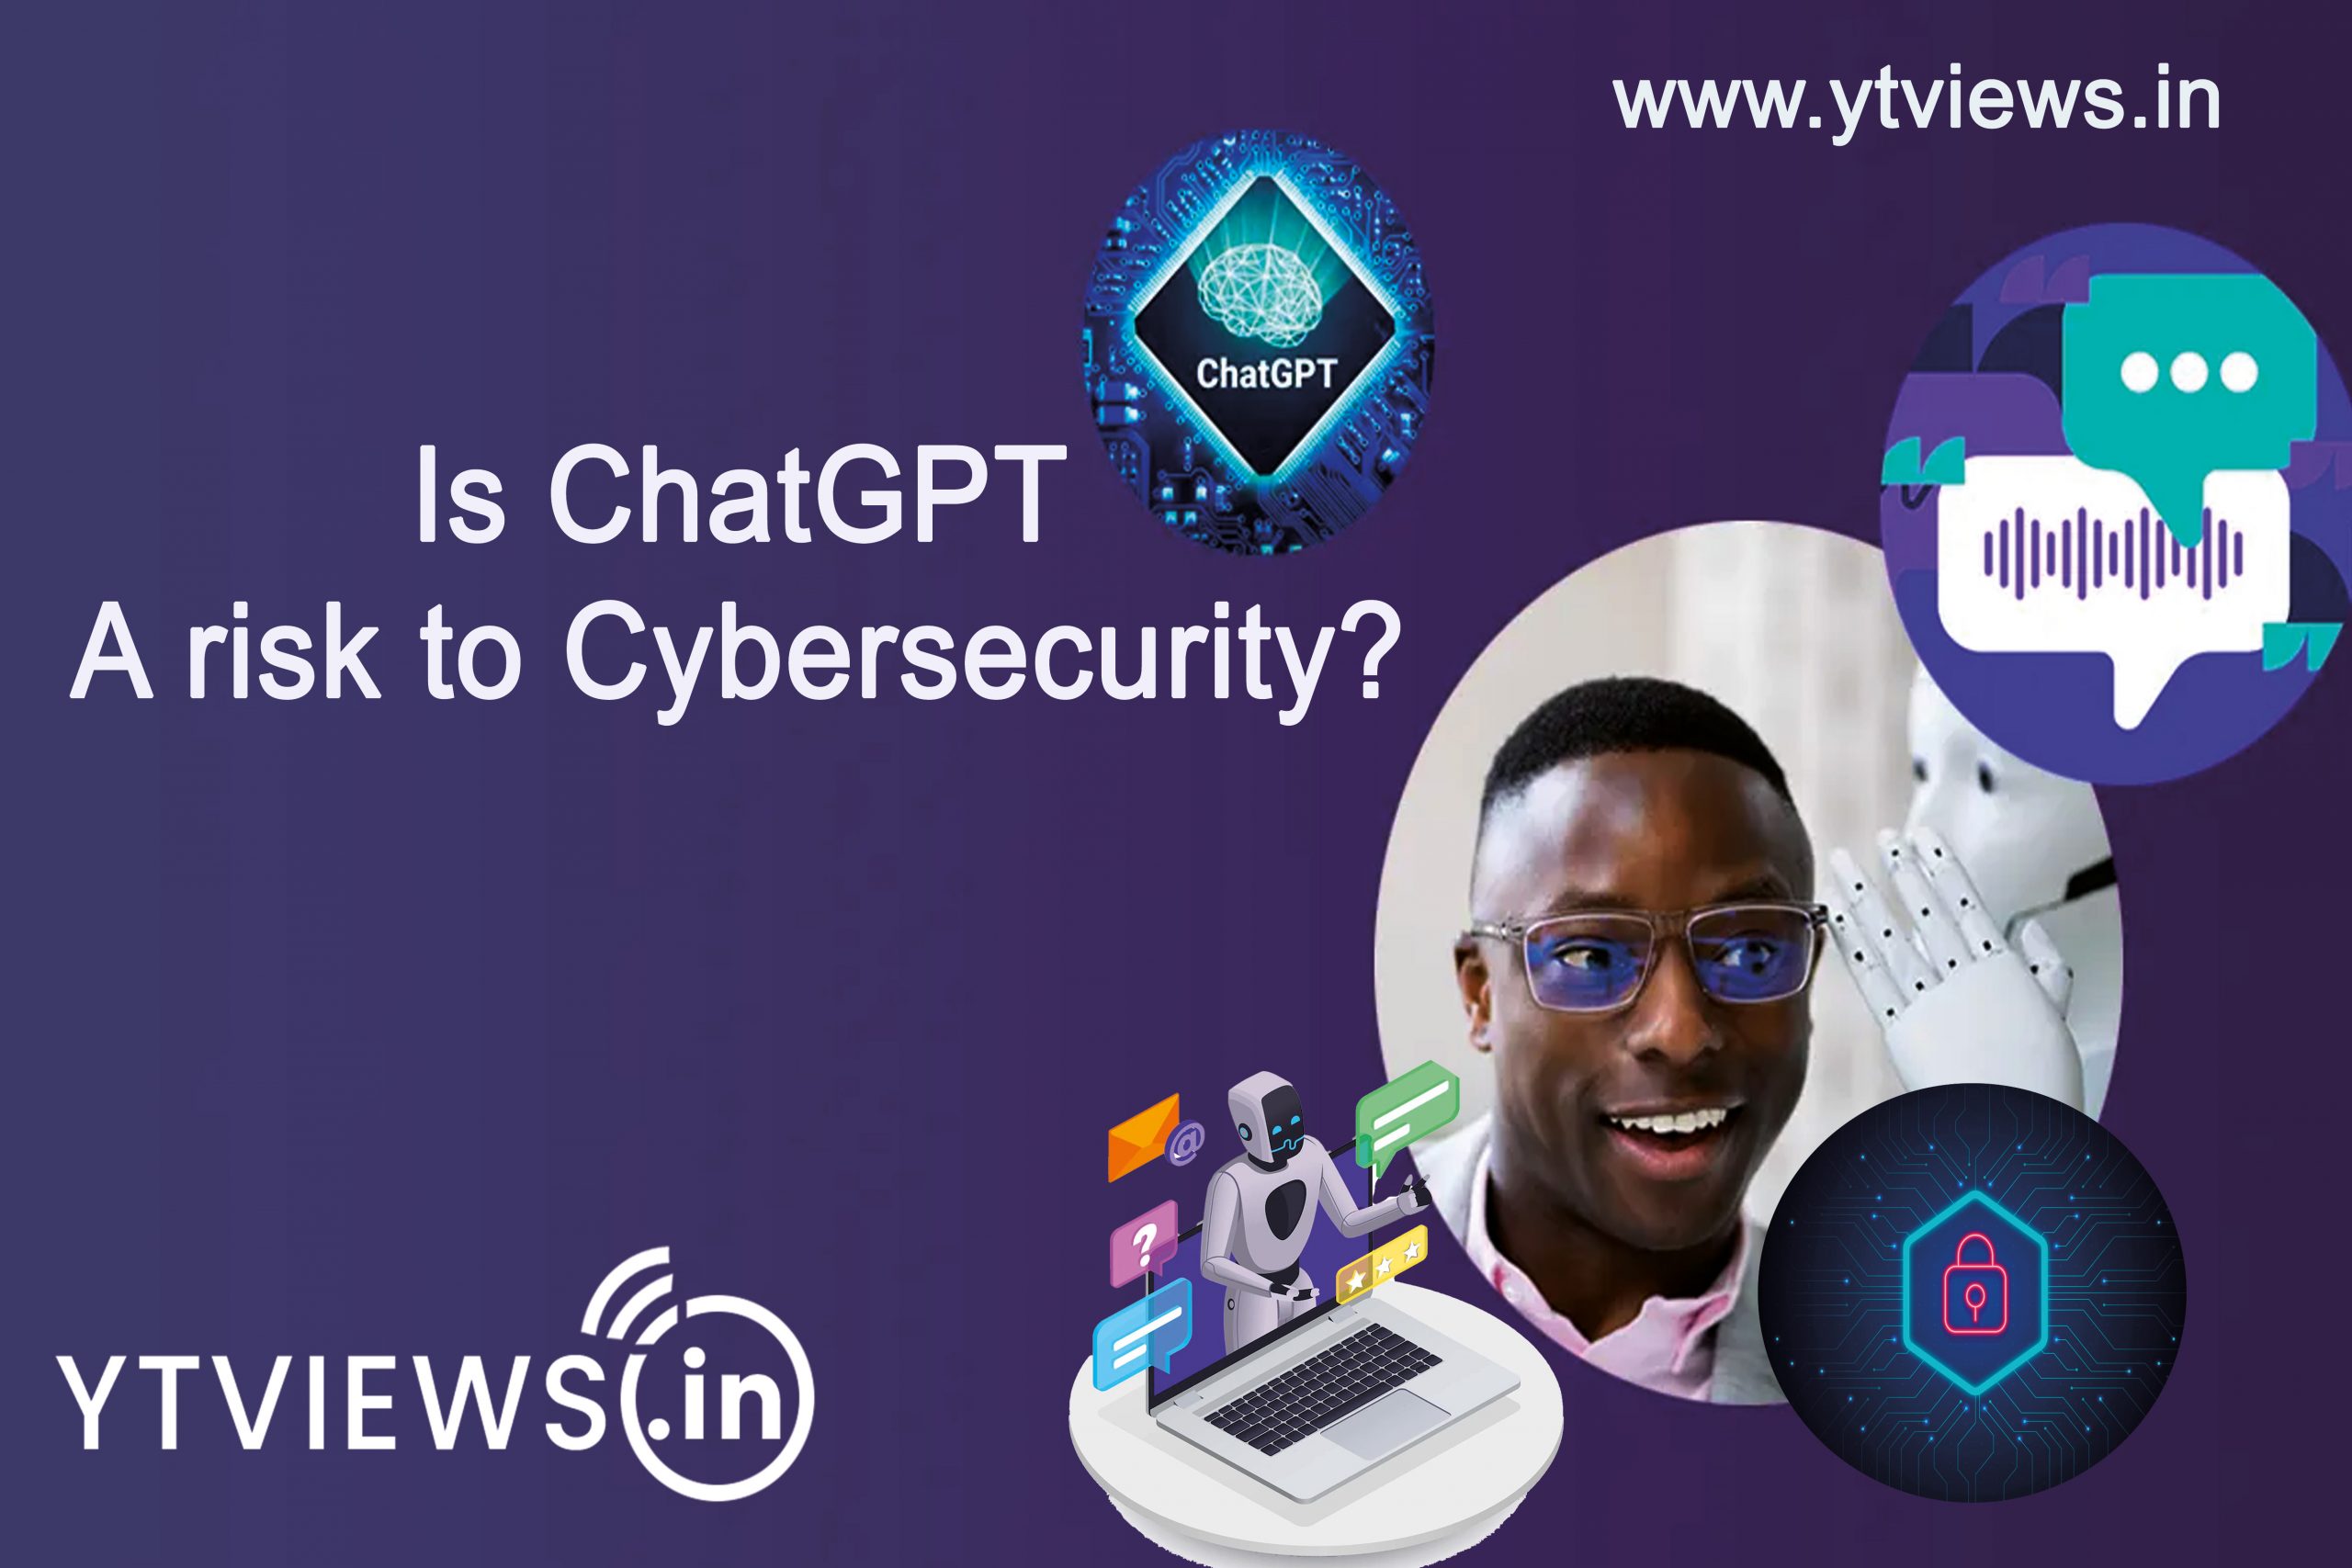 Is ChatGPT a risk to cybersecurity?